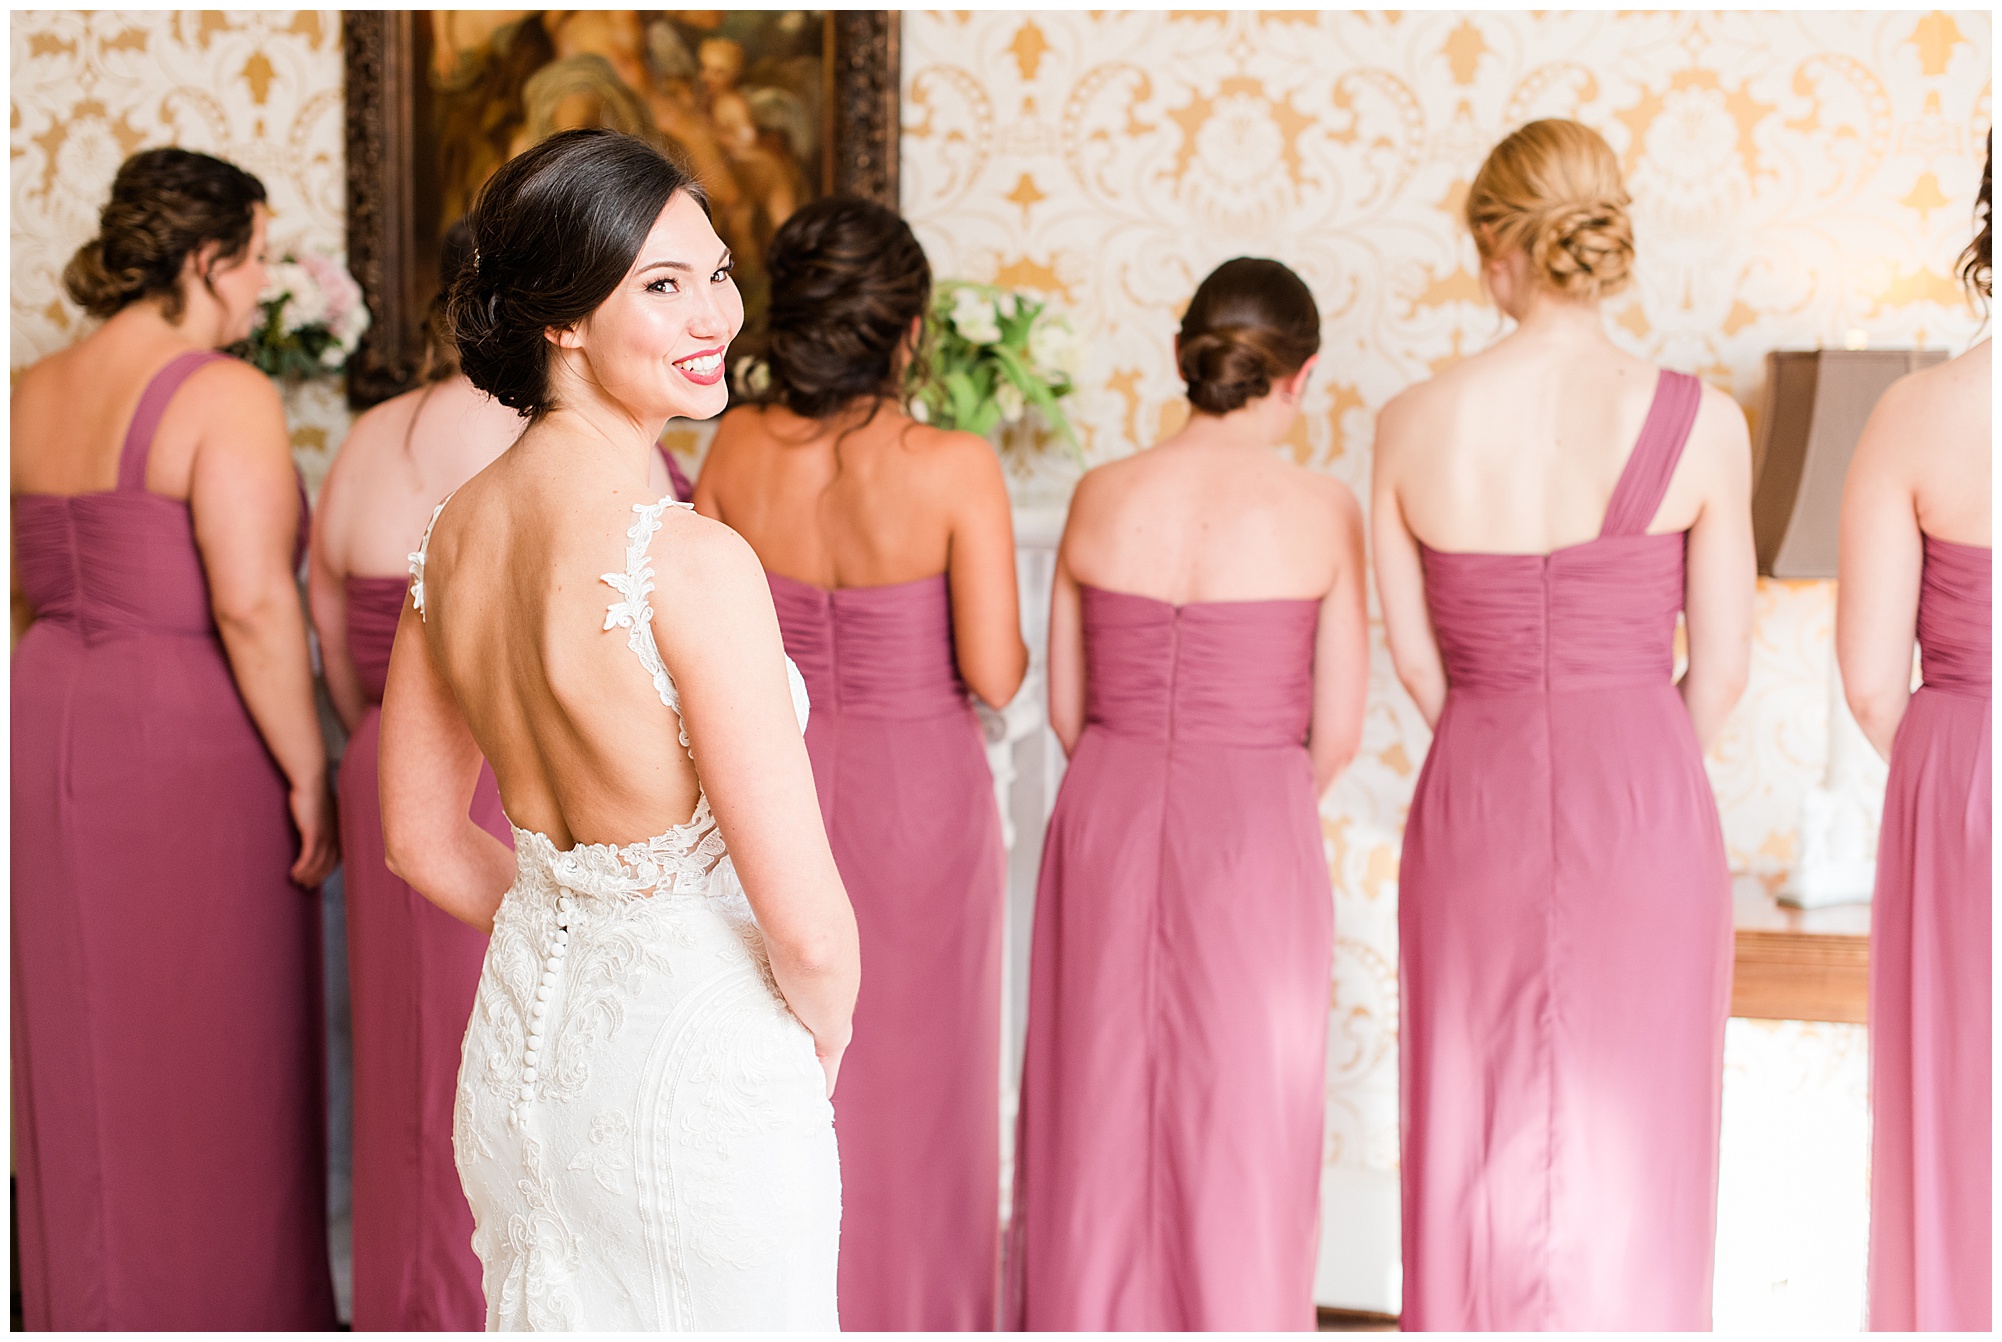 surprising bridesmaids with a reveal. bridal reveal photo at dover hall. prewedding day detail photo. by richmond va wedding photographer, sarah & dave photography